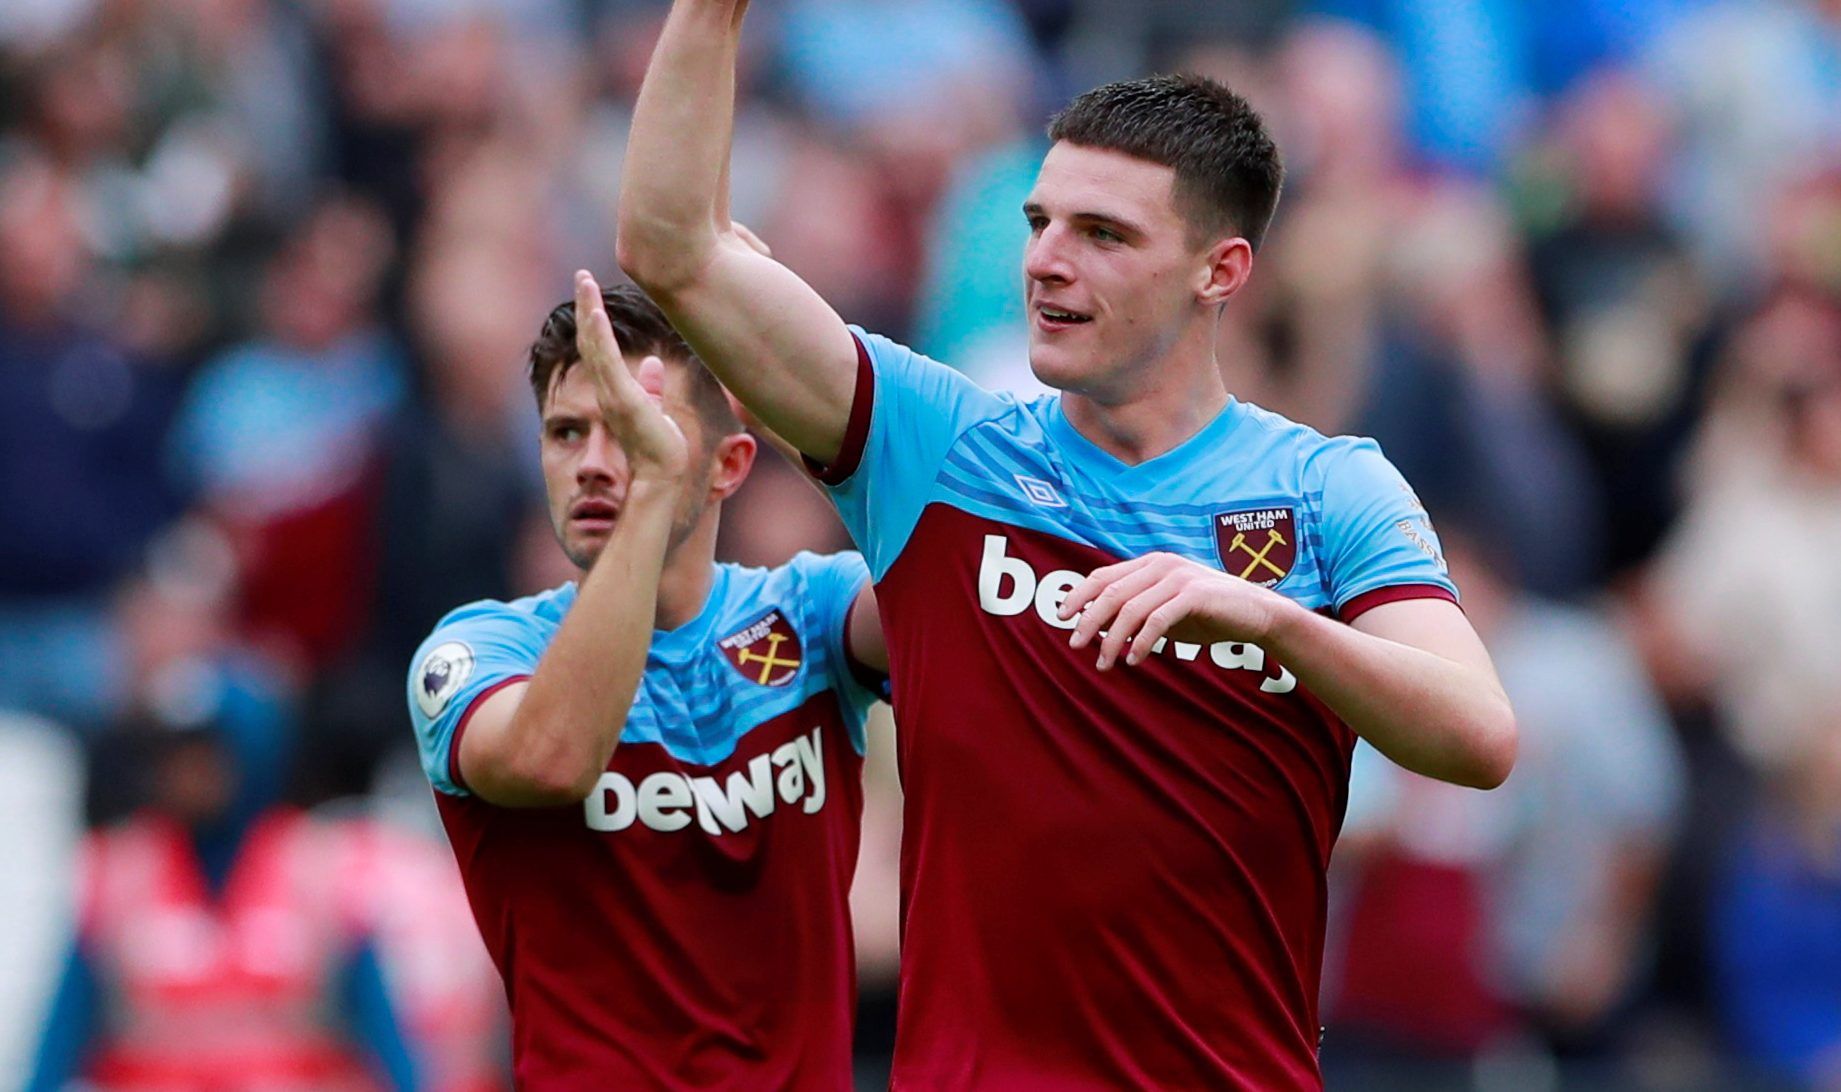 Soccer Football - Premier League - West Ham United v Manchester United - London Stadium, London, Britain - September 22, 2019  West Ham United's Declan Rice celebrates after the match   Action Images via Reuters/Andrew Couldridge  EDITORIAL USE ONLY. No use with unauthorized audio, video, data, fixture lists, club/league logos or 